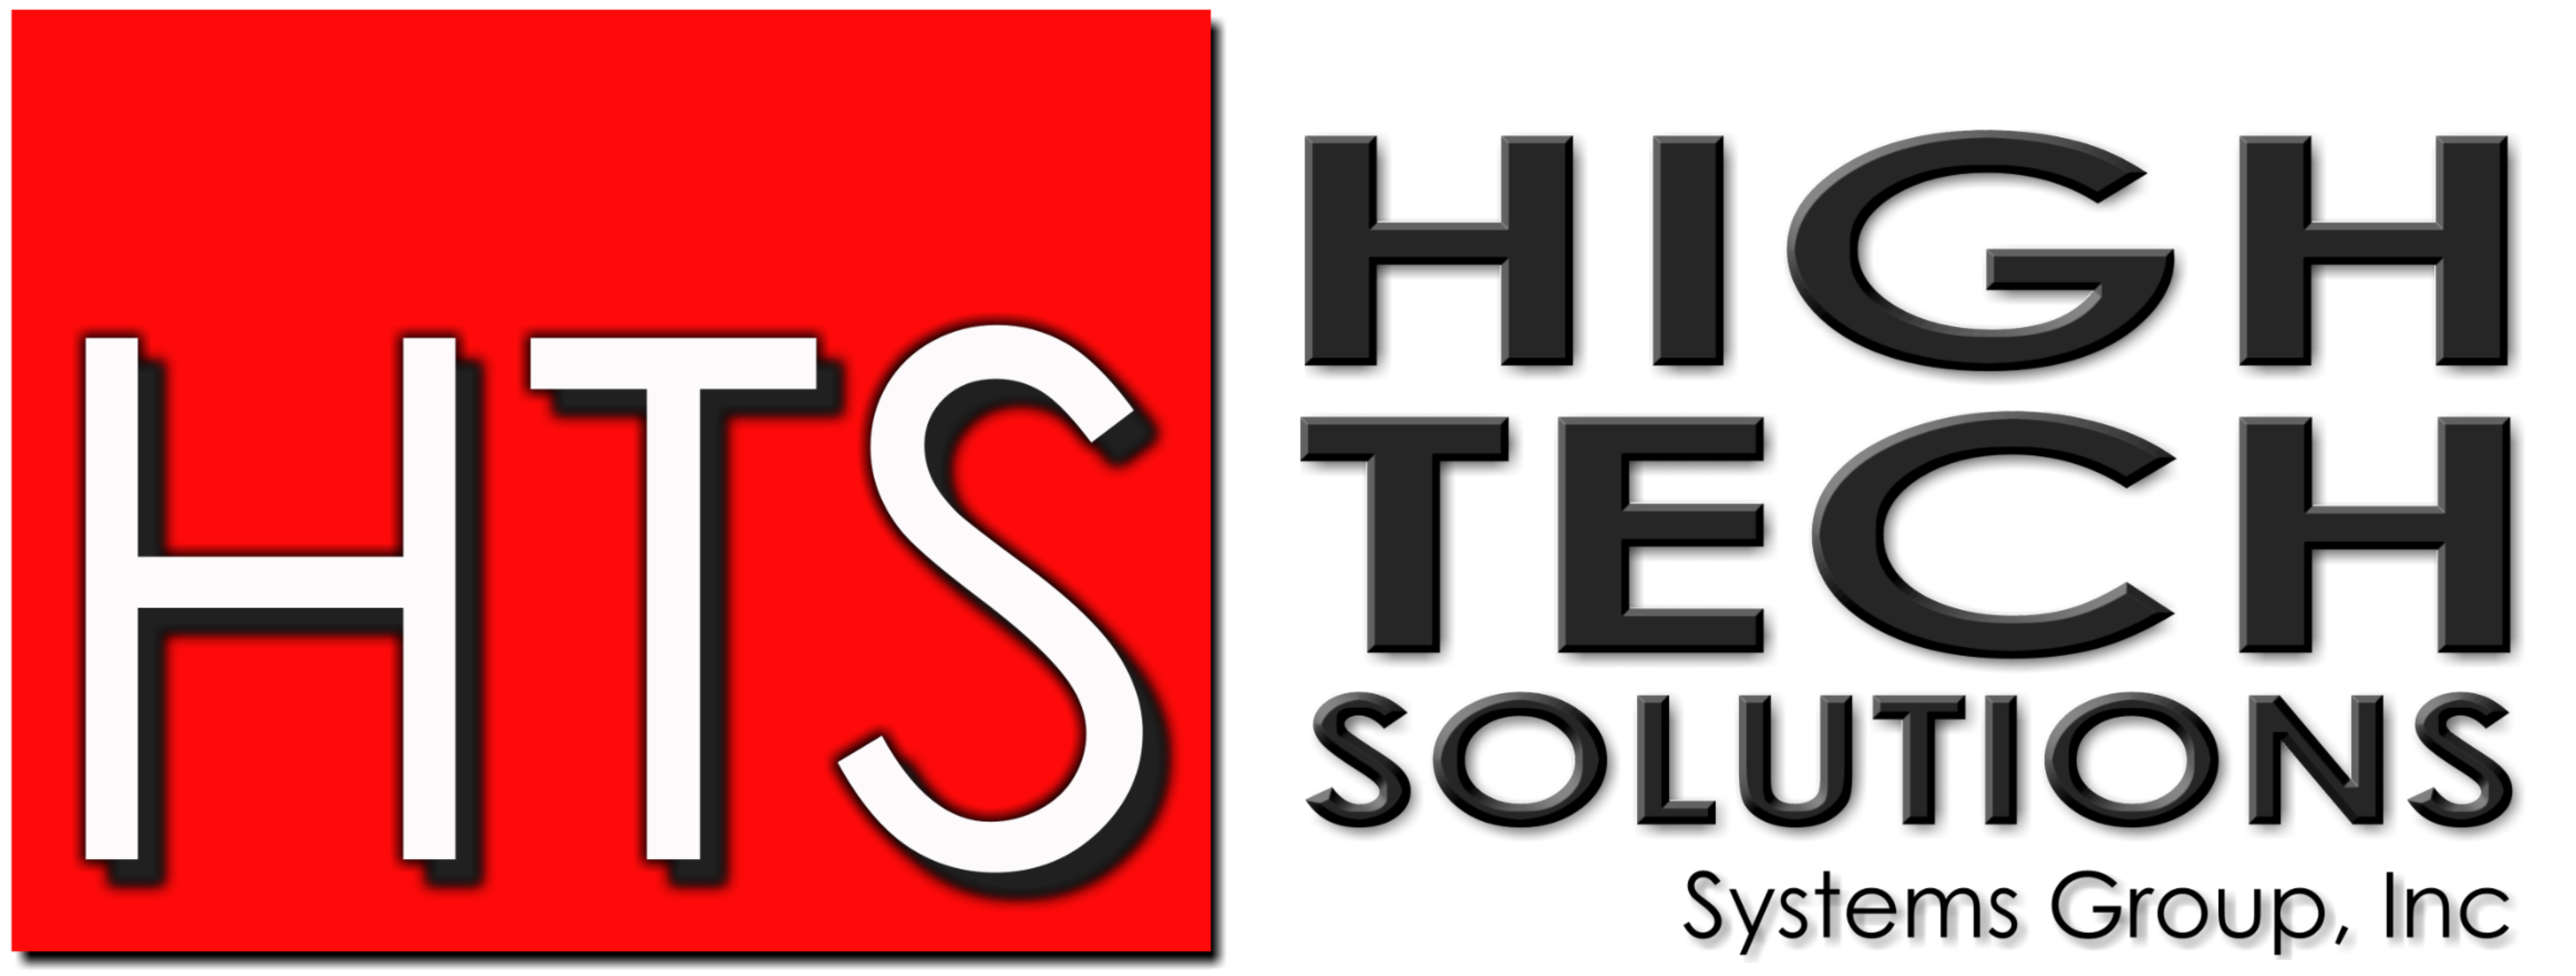 High Tech Solutions Systems Group, Inc.